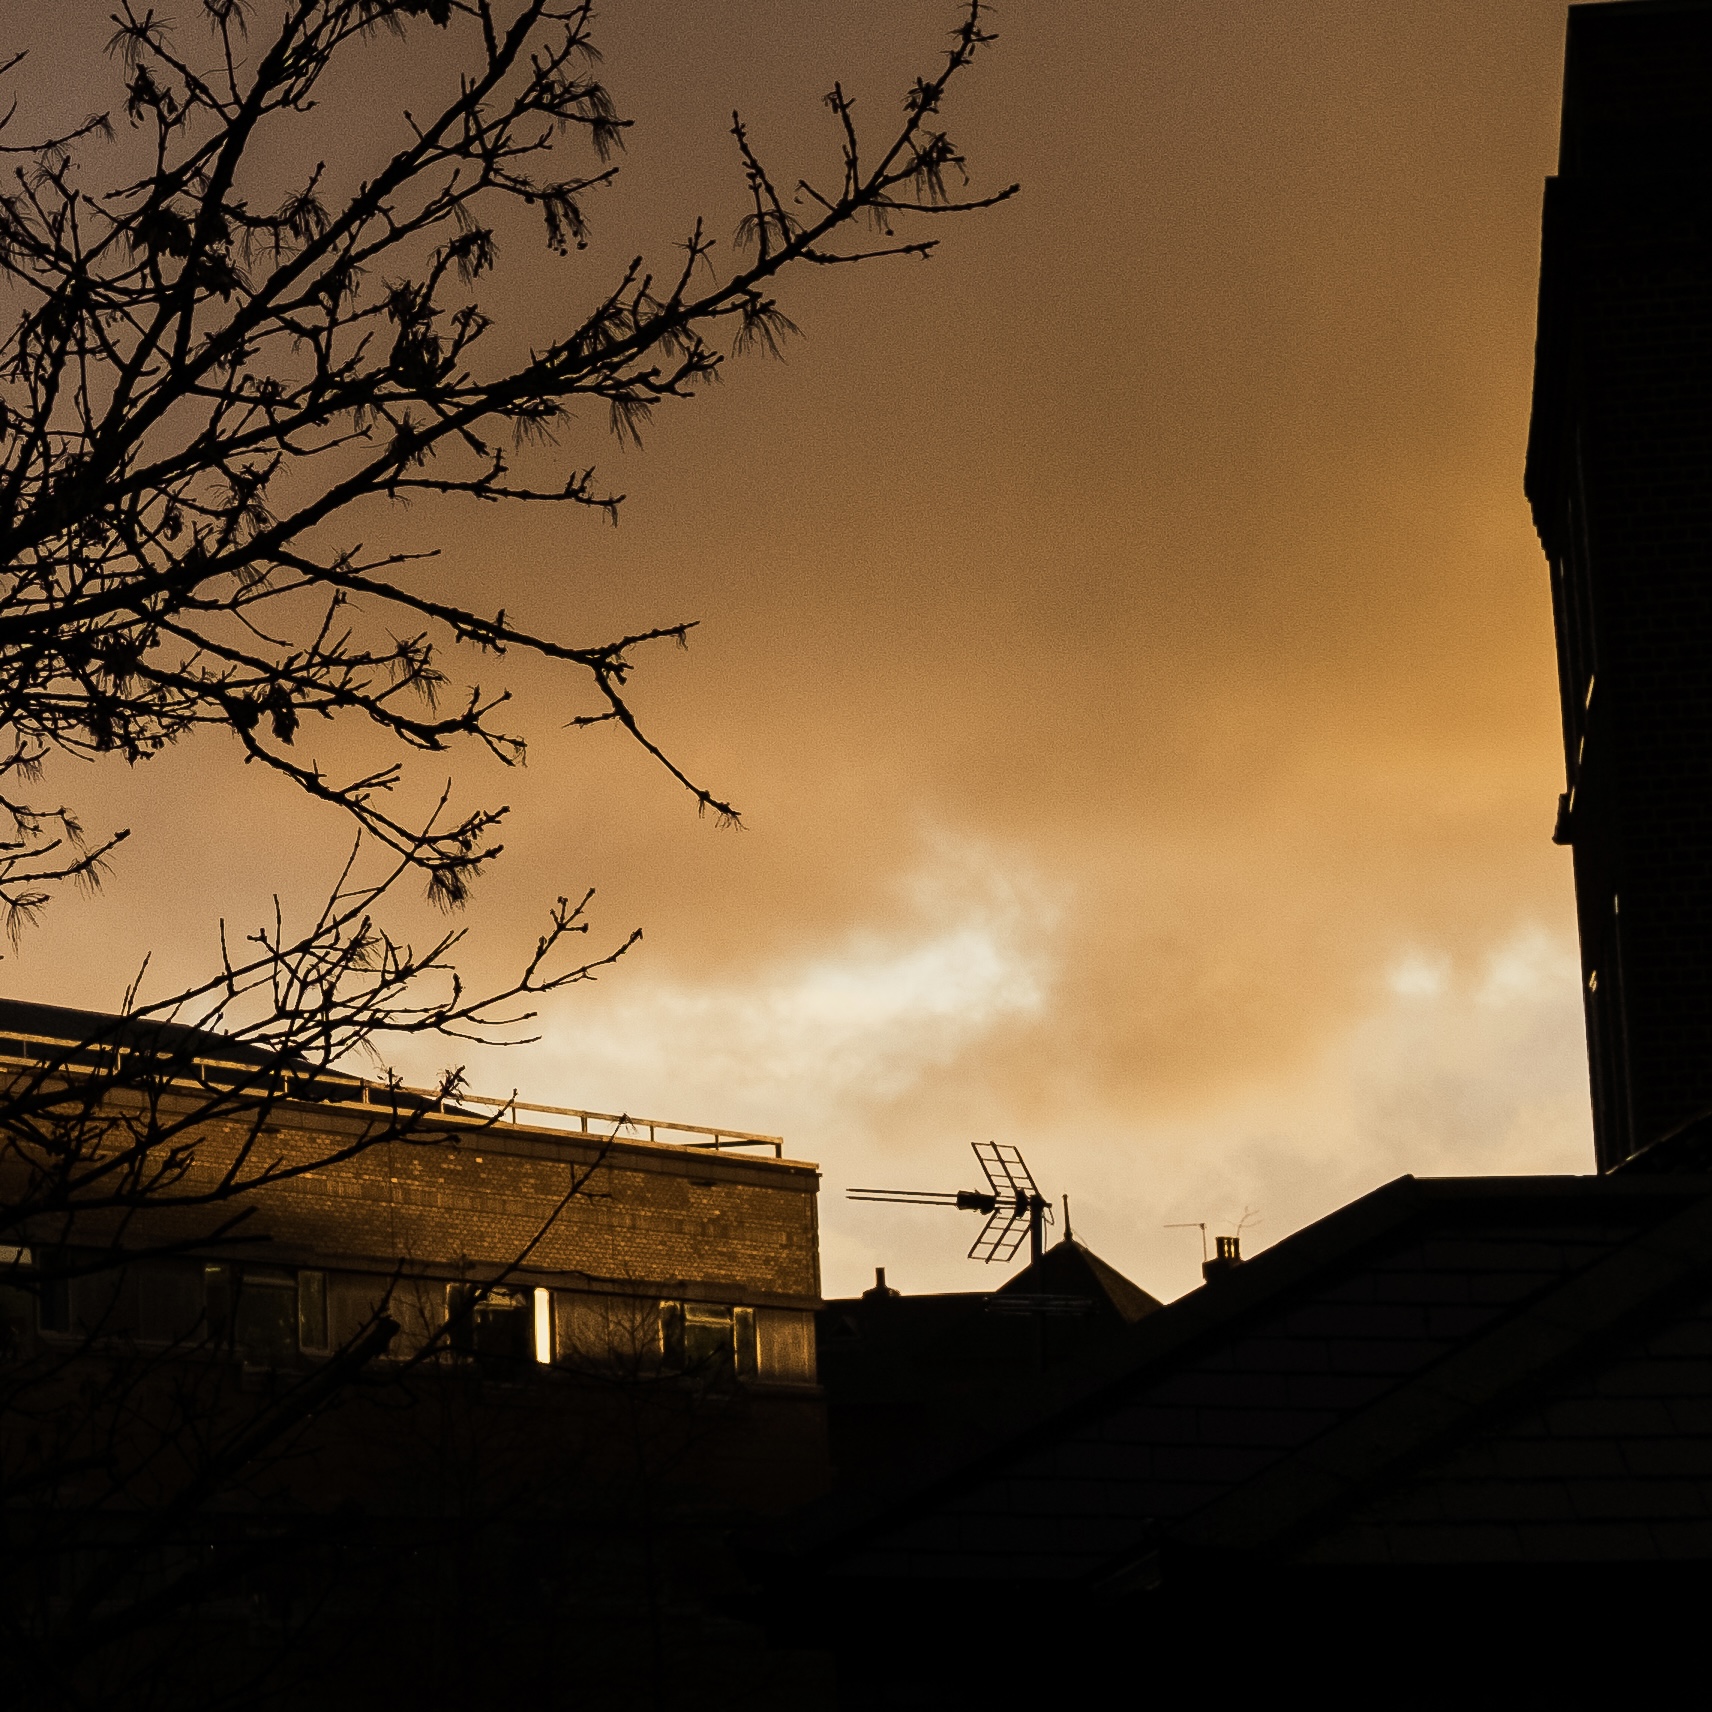 Stormy sunset over North London today. View from my window at the end of a cooped up day. 